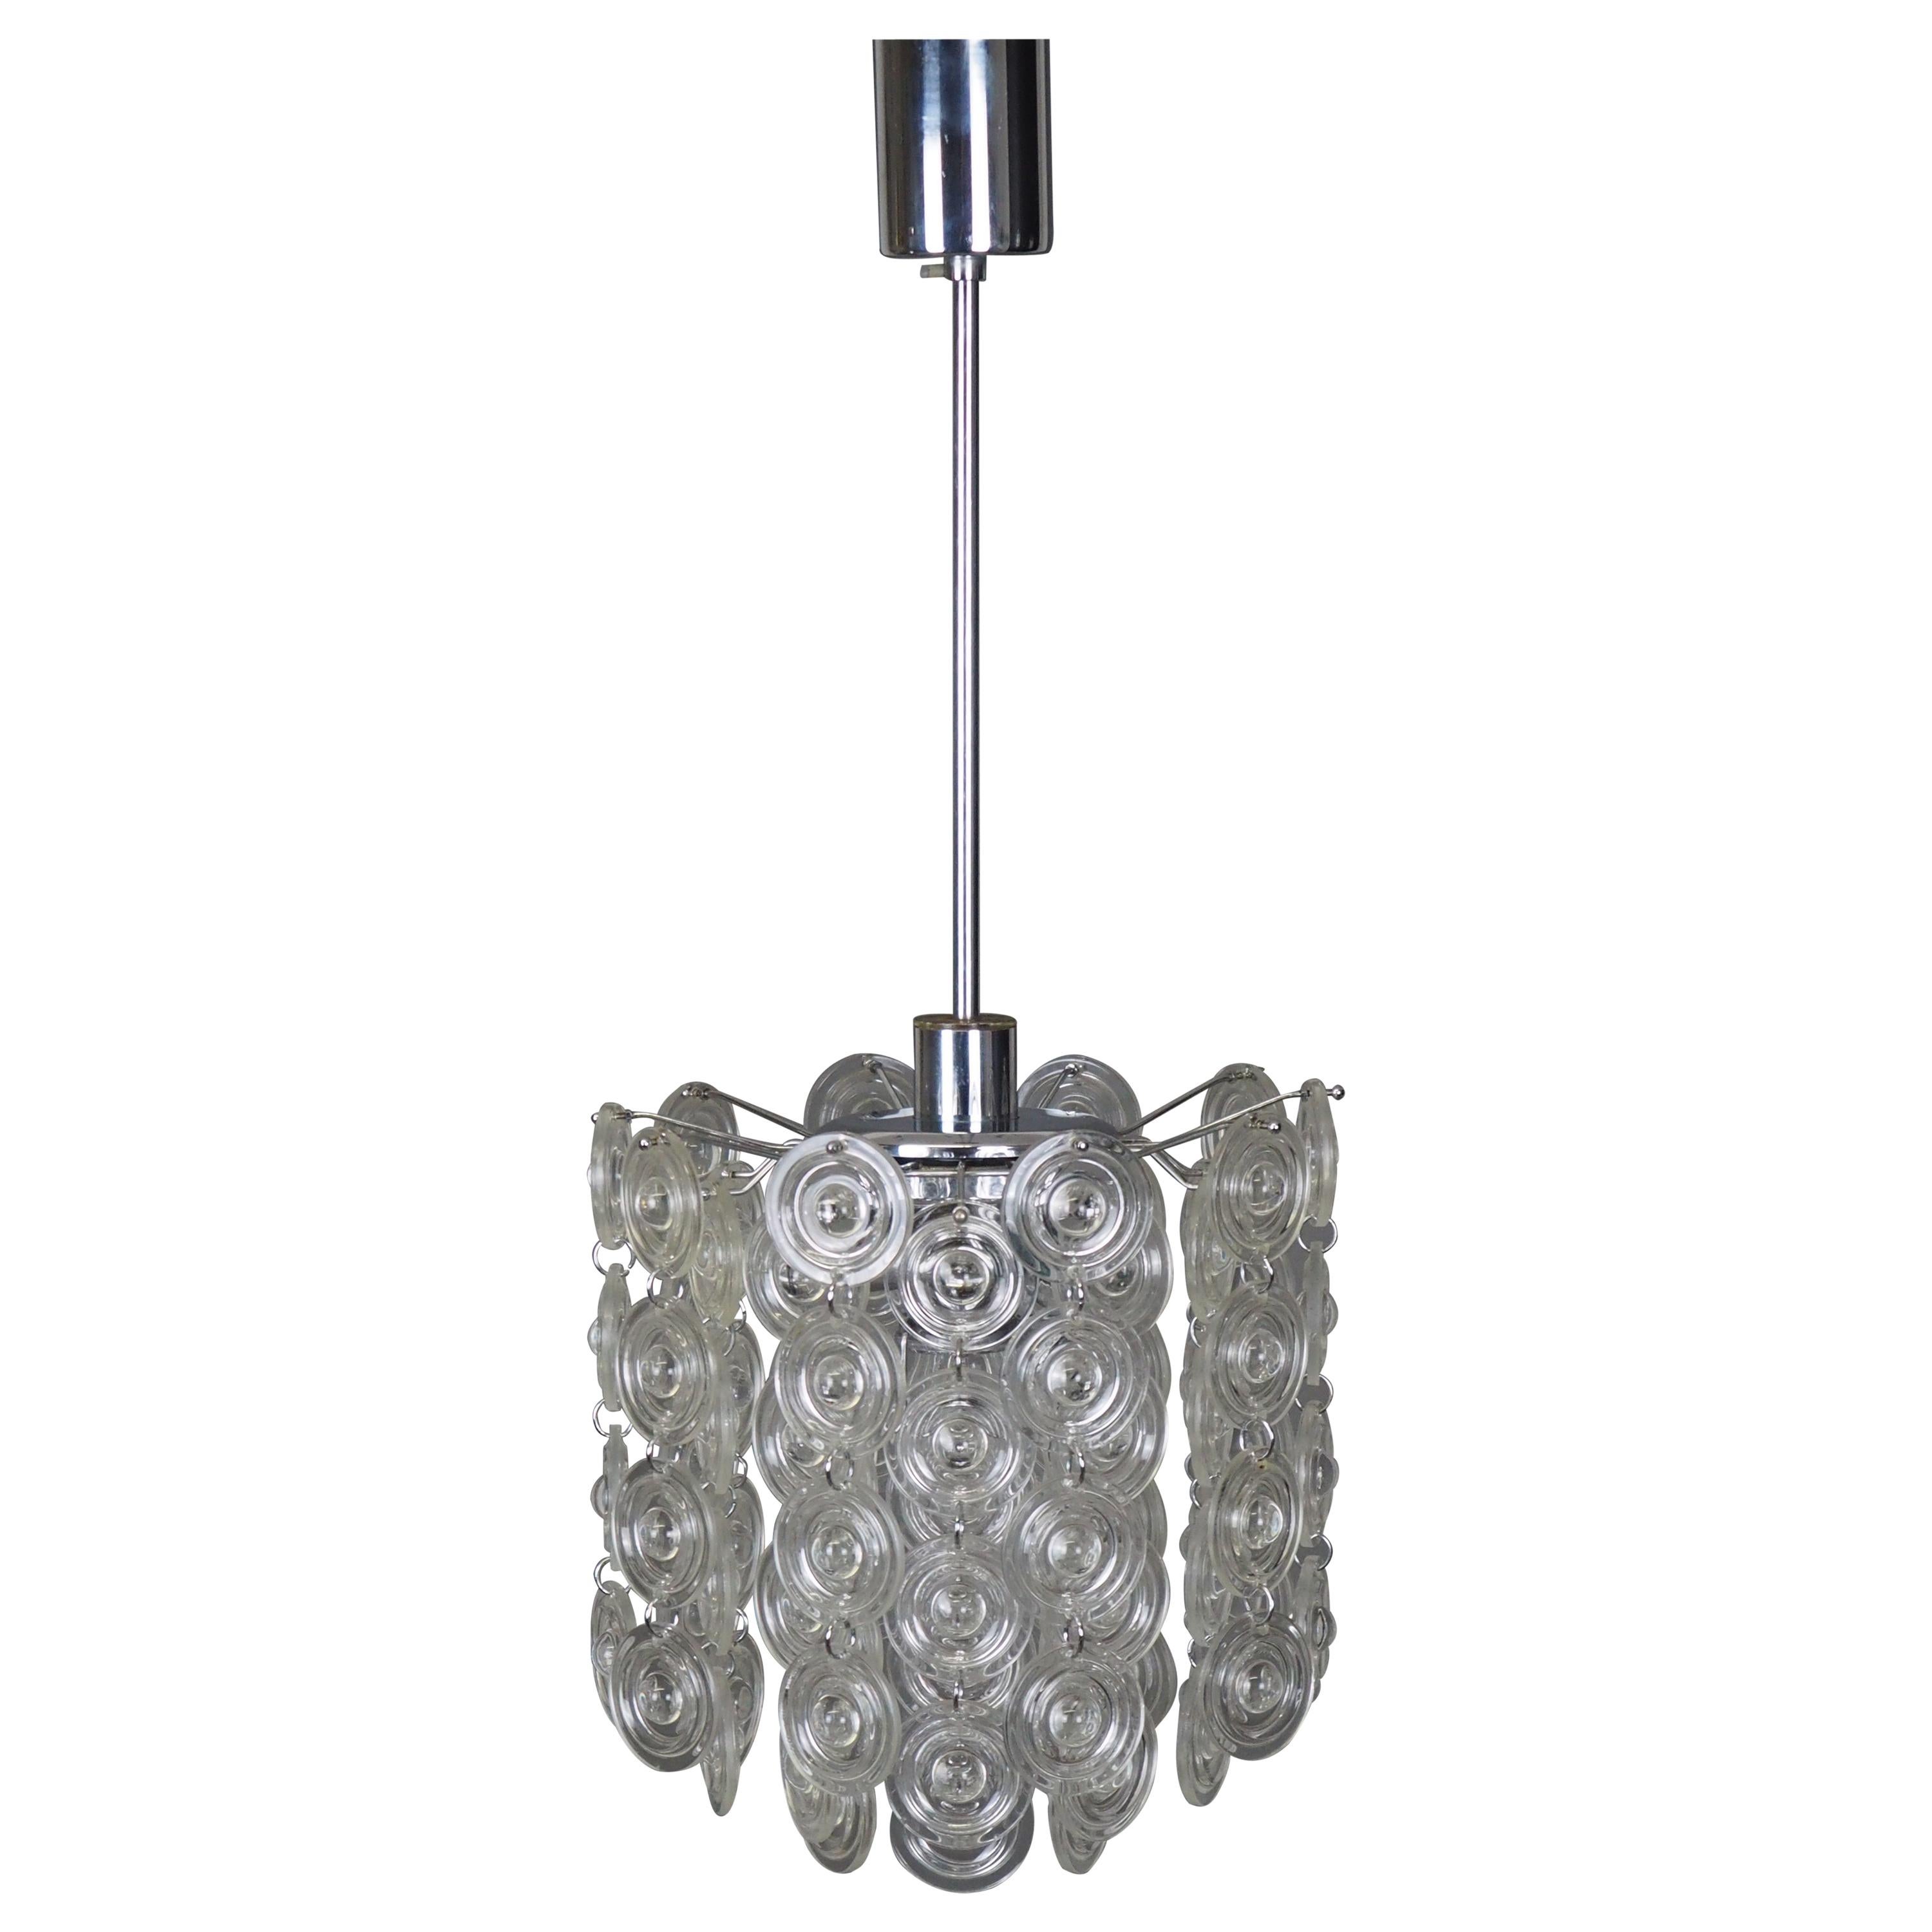 Rare Glass and Nickel Chandelier by Sciolari, Italy, circa 1970s For Sale